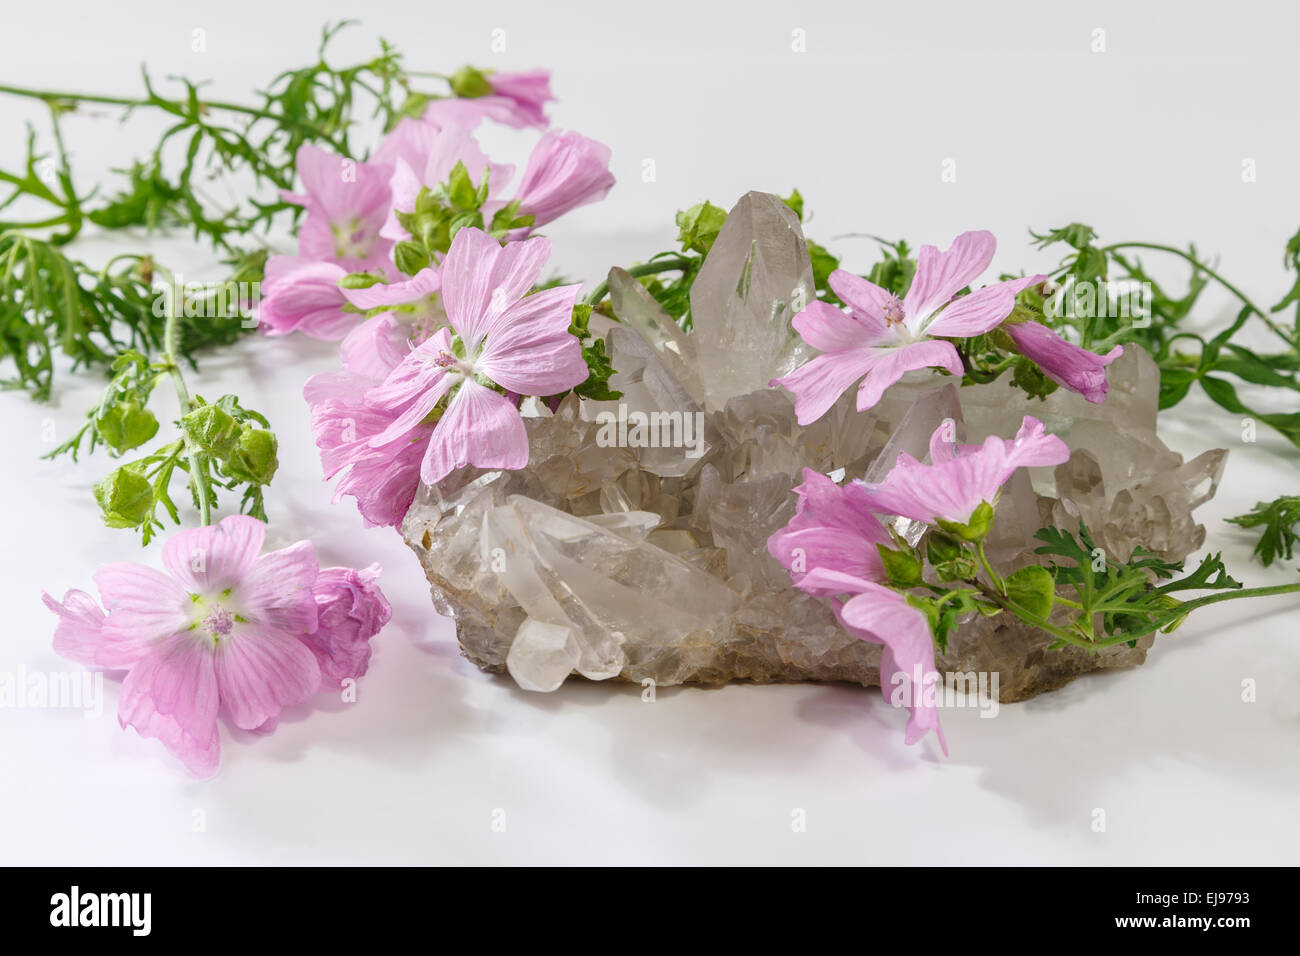 Rose mallow and rock crystal Stock Photo